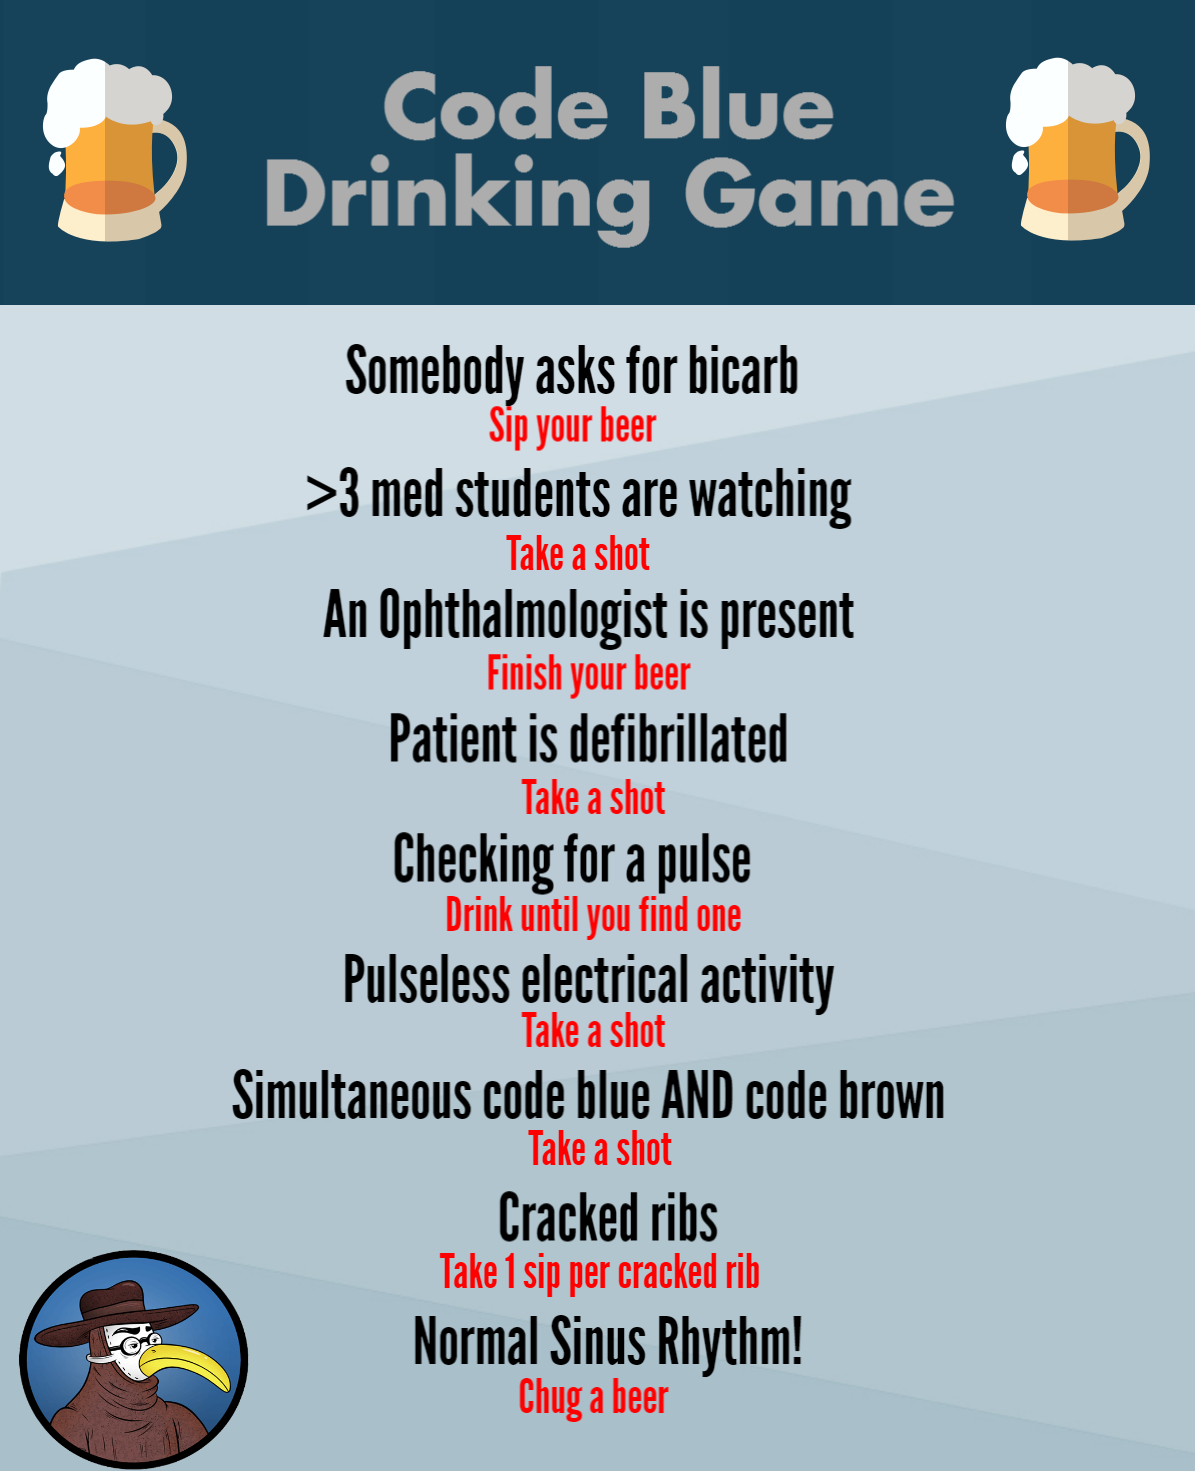 Code Blue Drinking Game Final